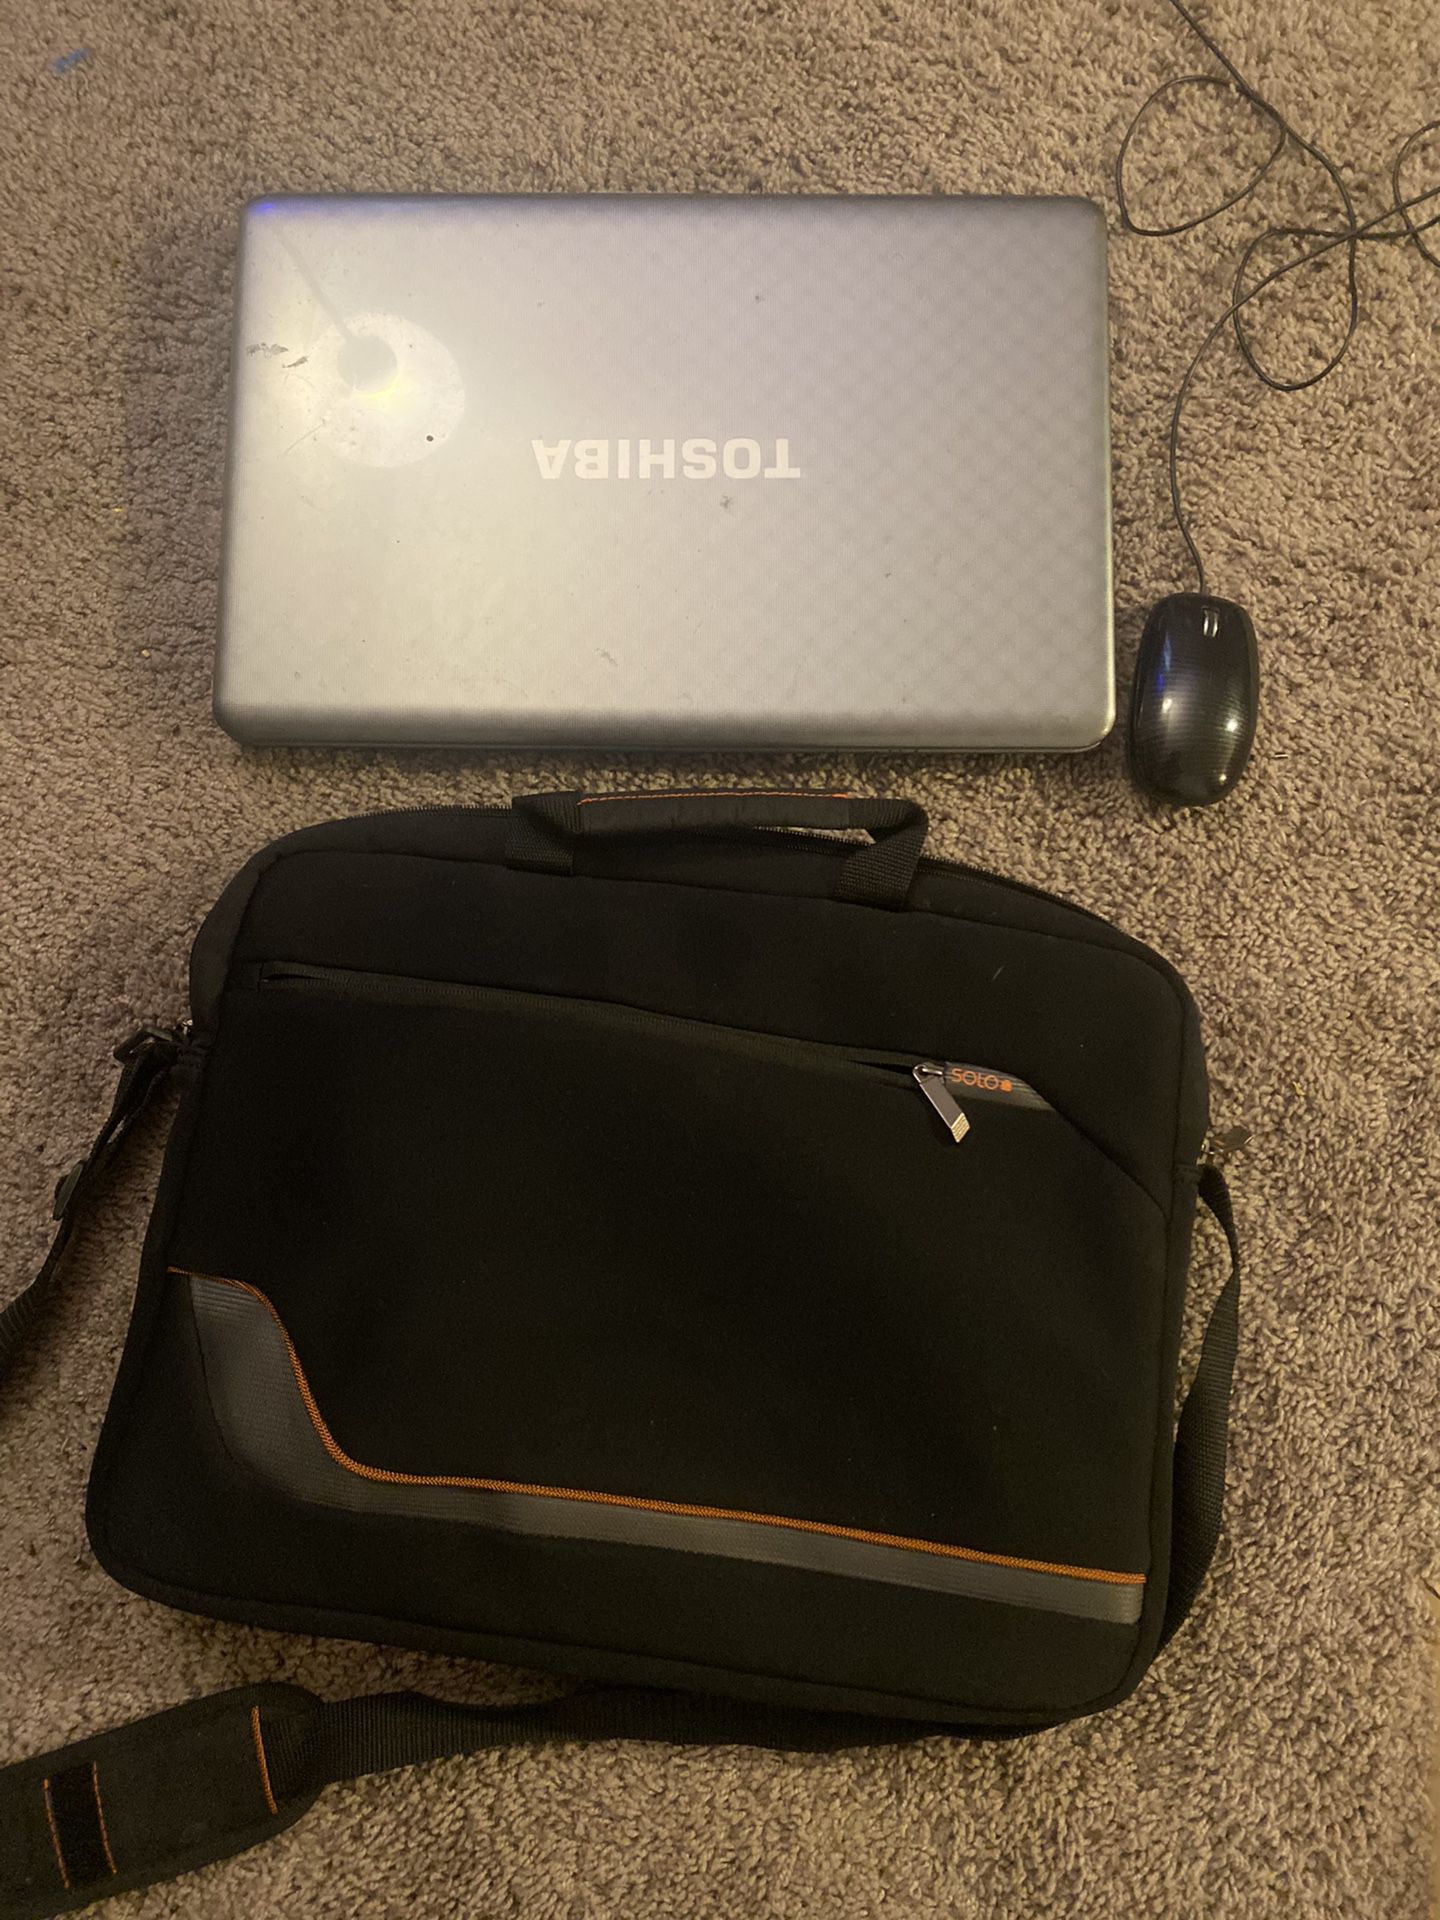 Toshiba Laptop with chargers, mouse, and case